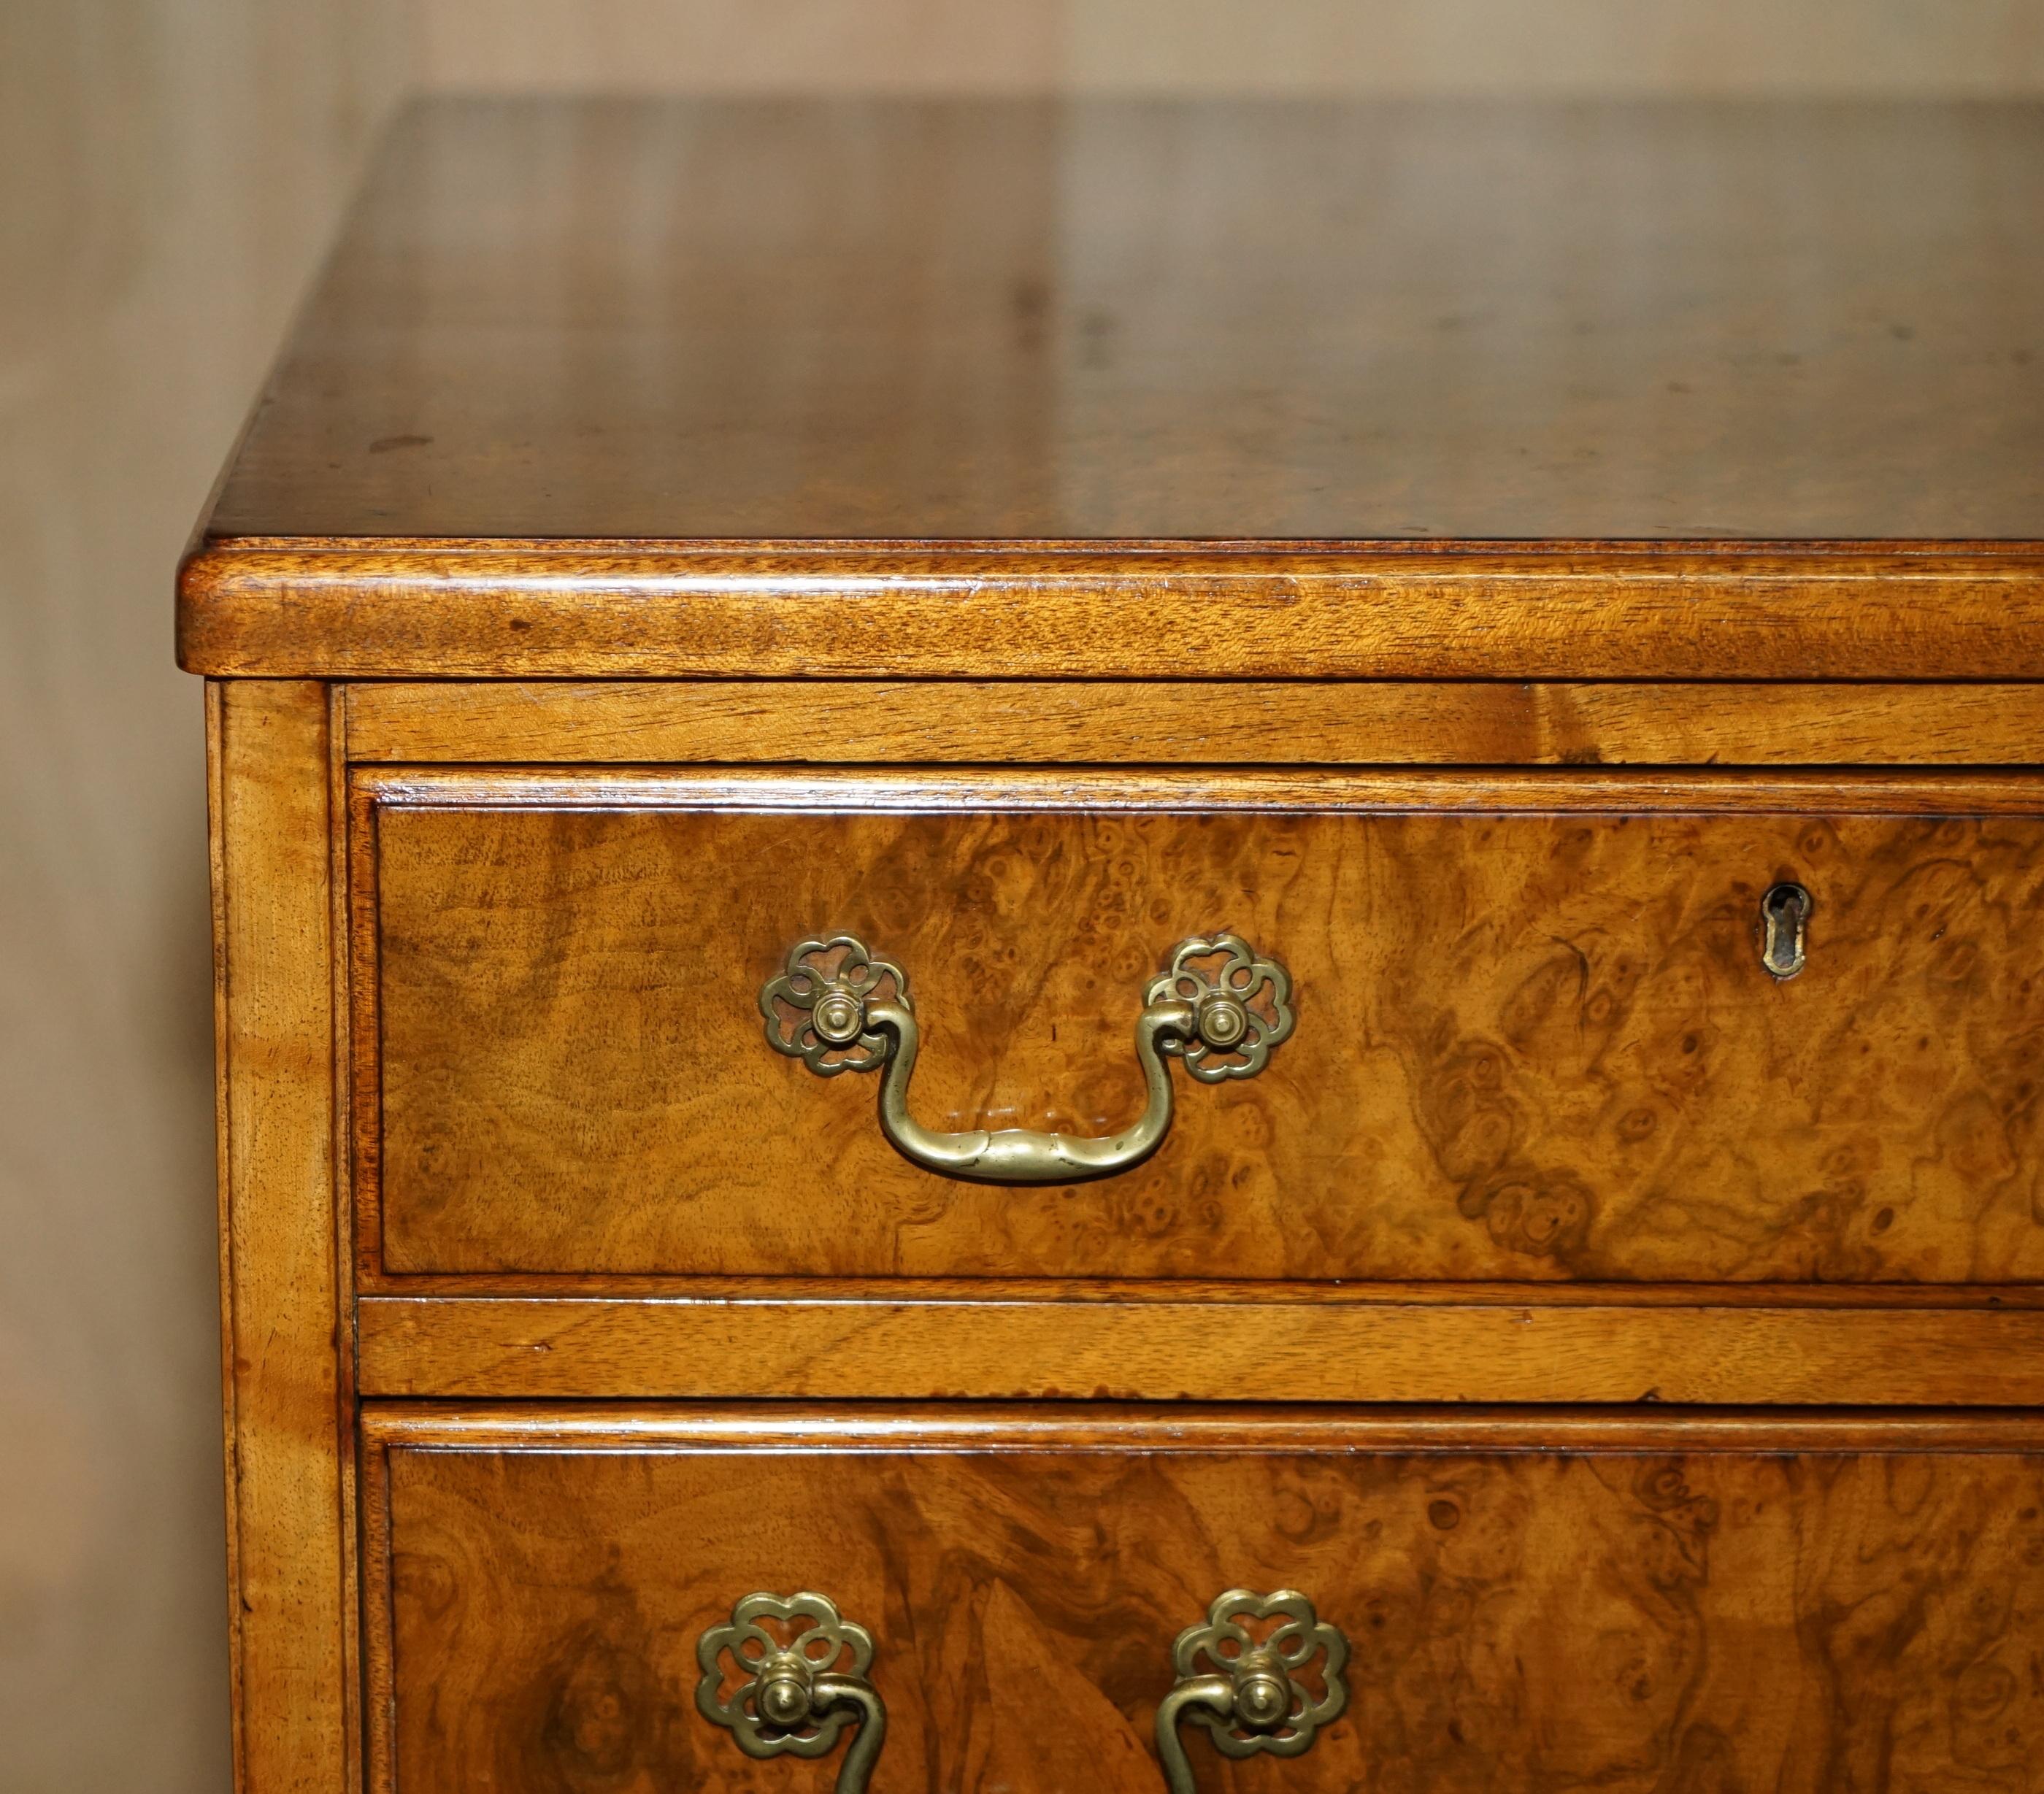 20th Century Stunning Large Sideboard Sized Bank or Chest of Drawers in Burr and Burl Walnut